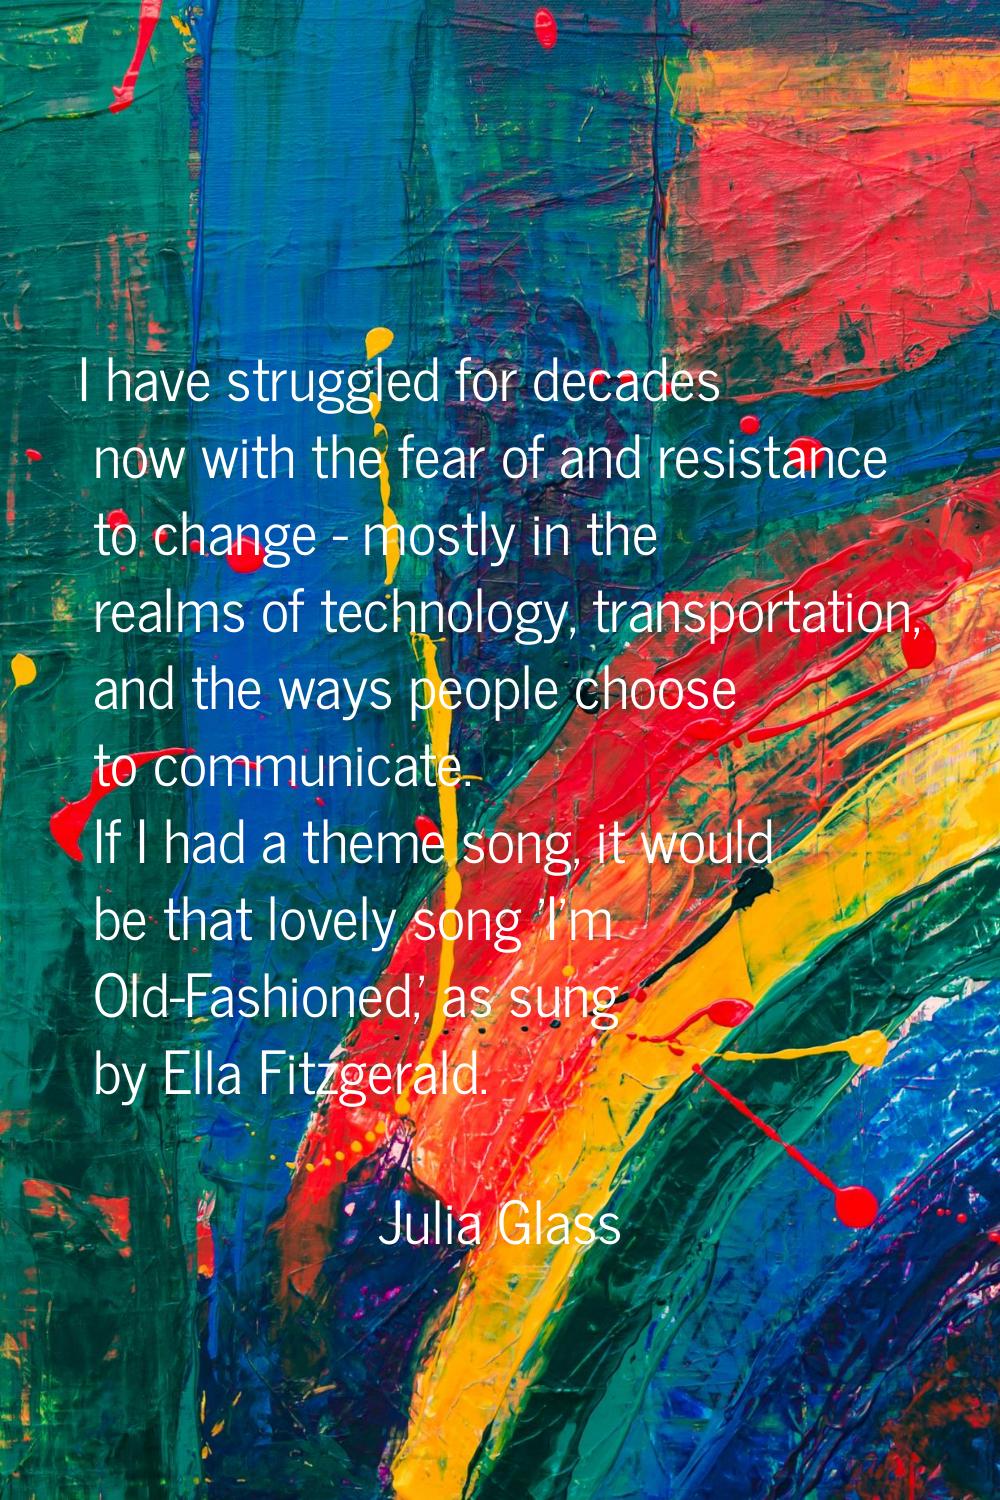 I have struggled for decades now with the fear of and resistance to change - mostly in the realms o